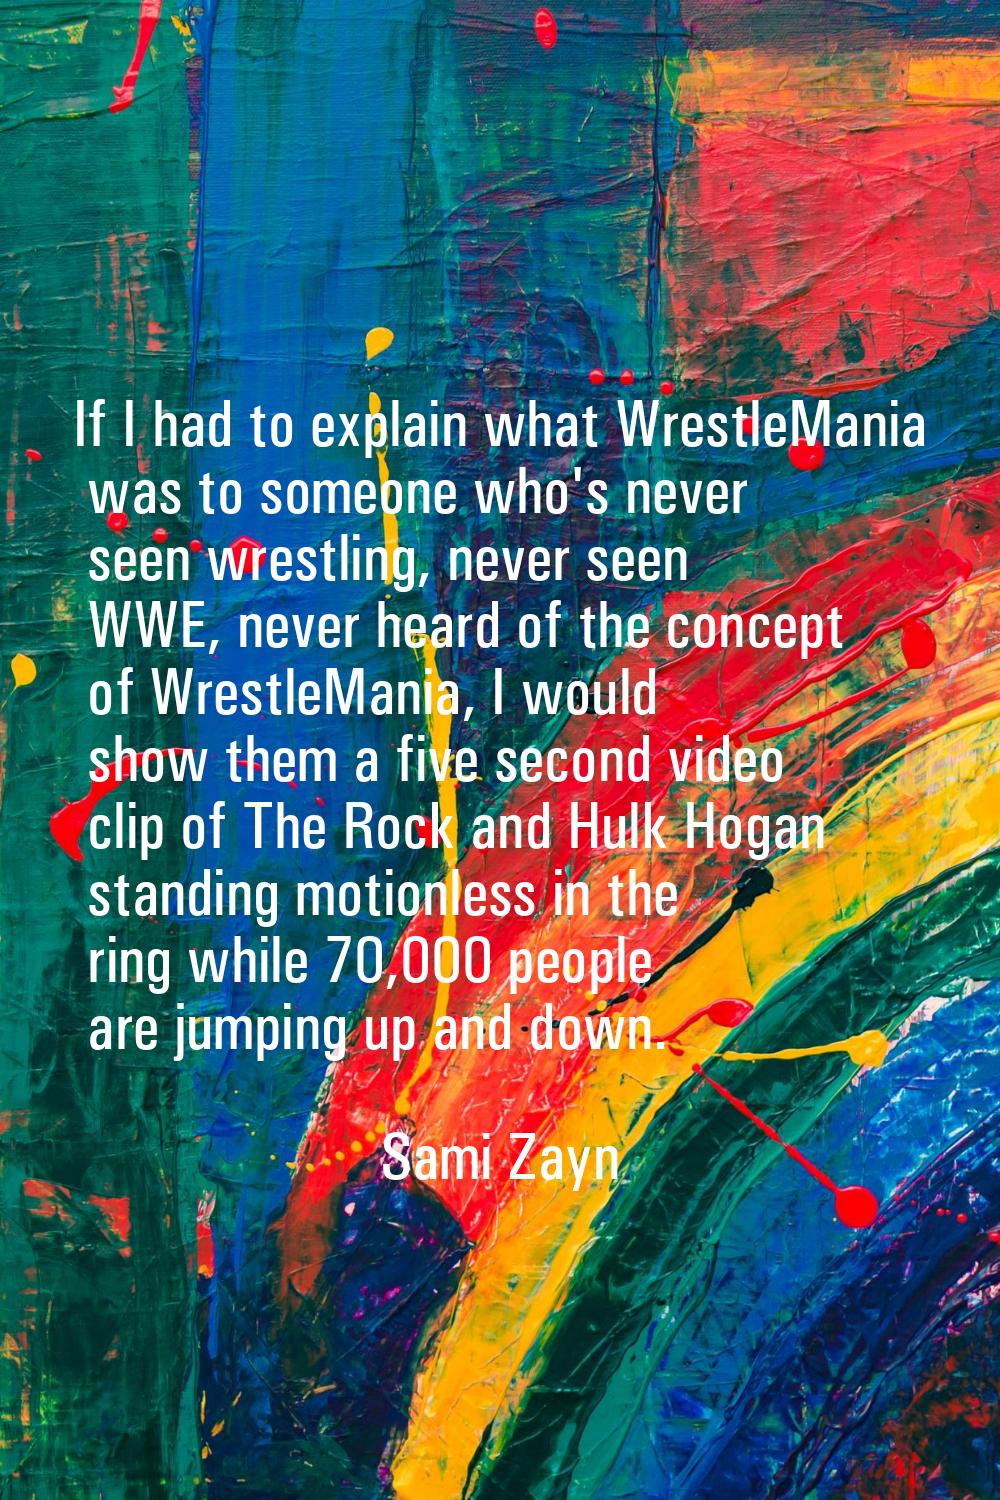 If I had to explain what WrestleMania was to someone who's never seen wrestling, never seen WWE, ne